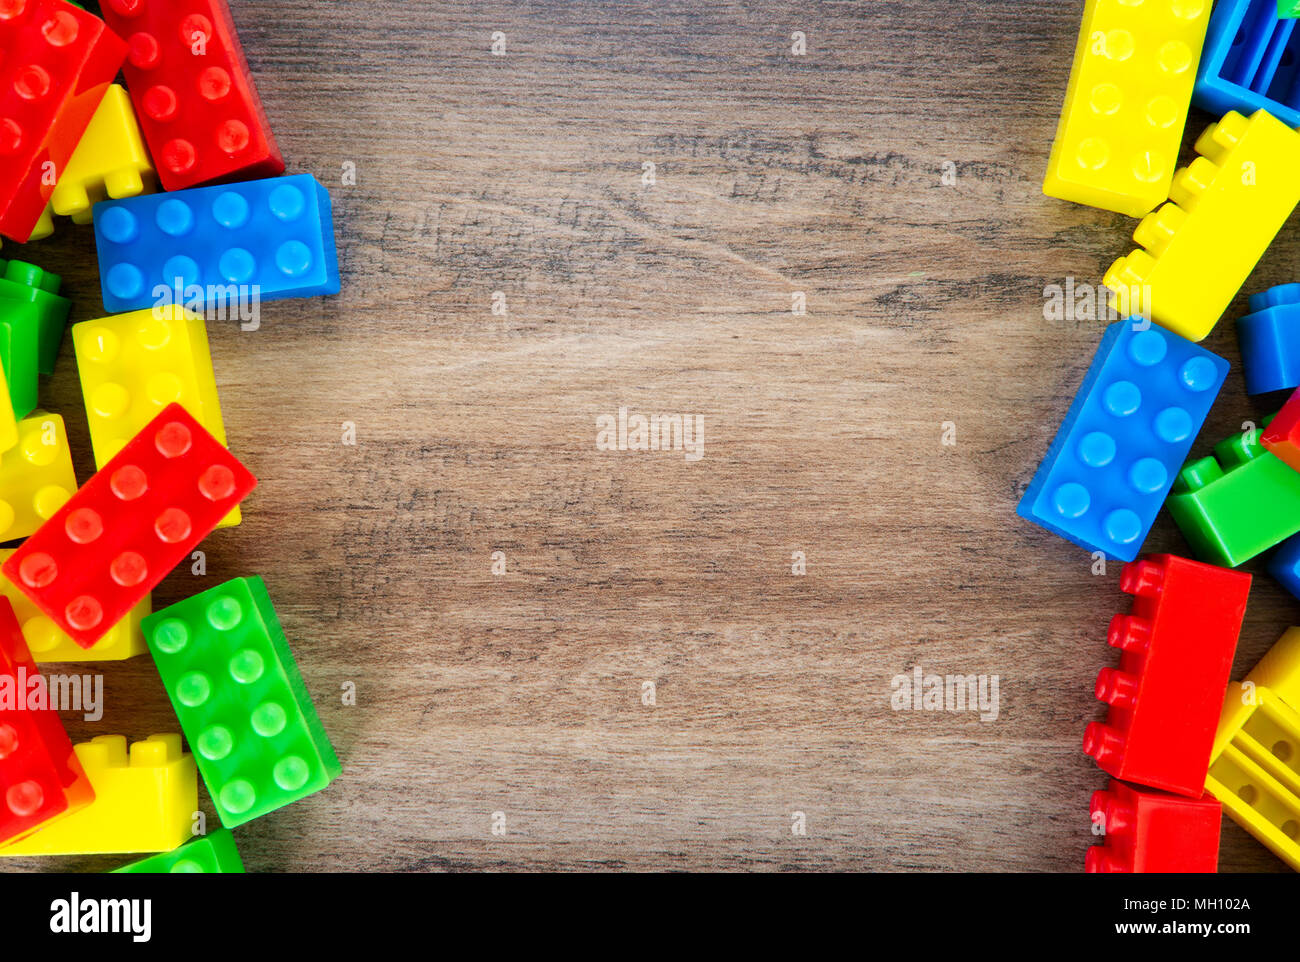 Colorful toy building blocks on wood background. Stock Photo